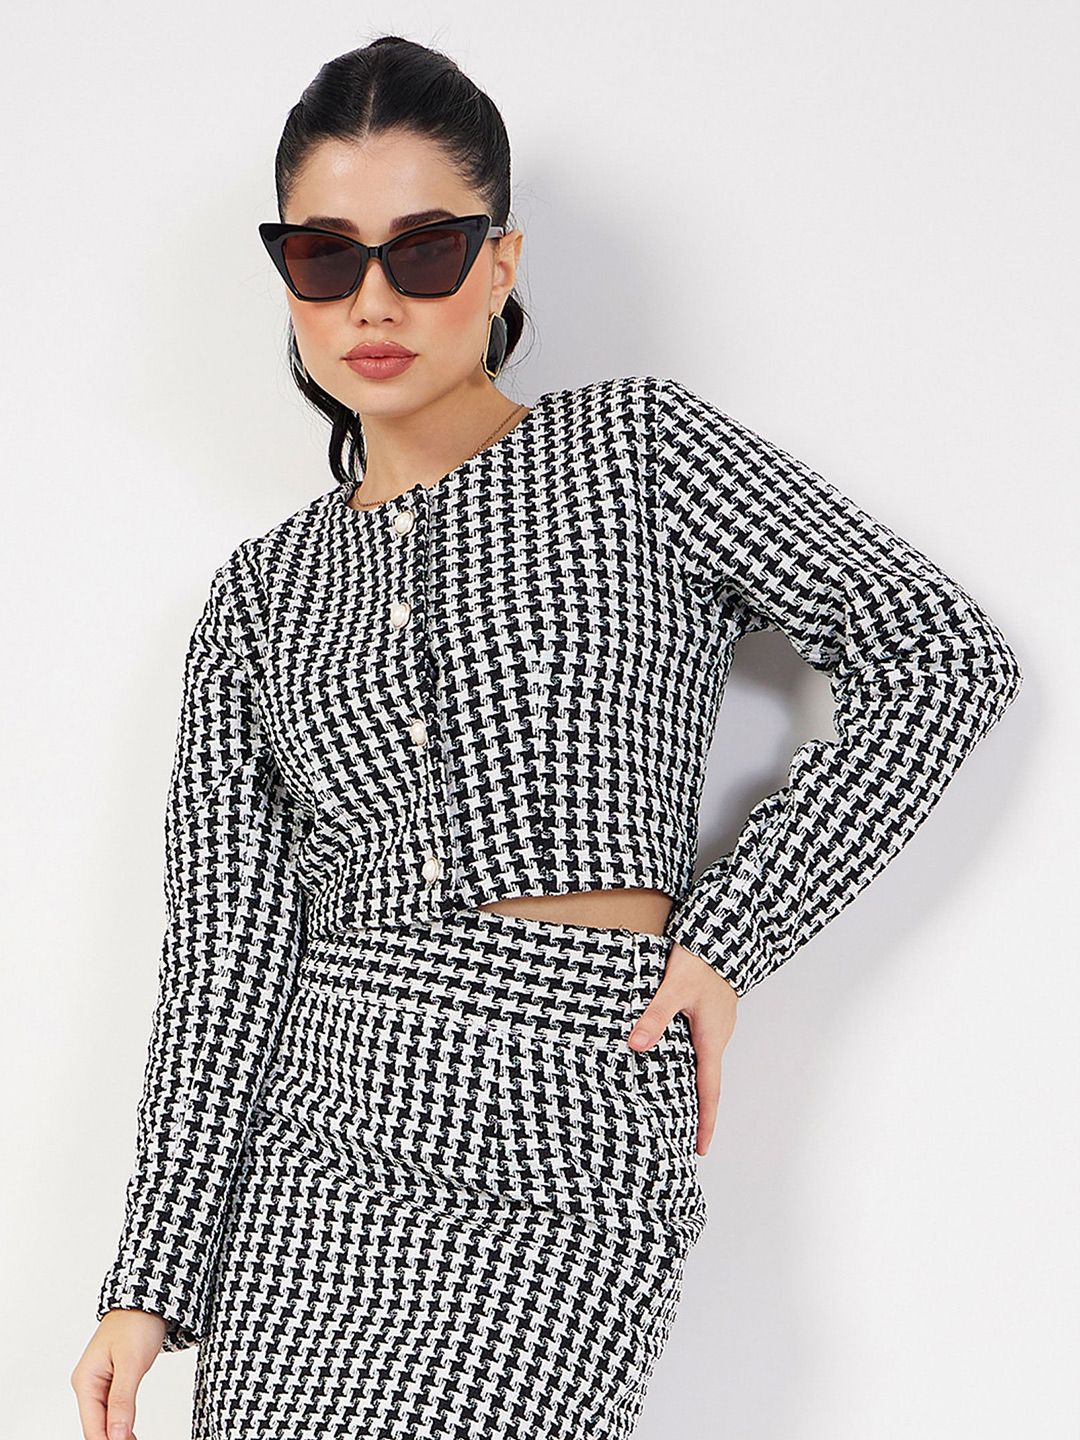 SASSAFRAS Black Checked Long Sleeve Shirt Style Top Price in India